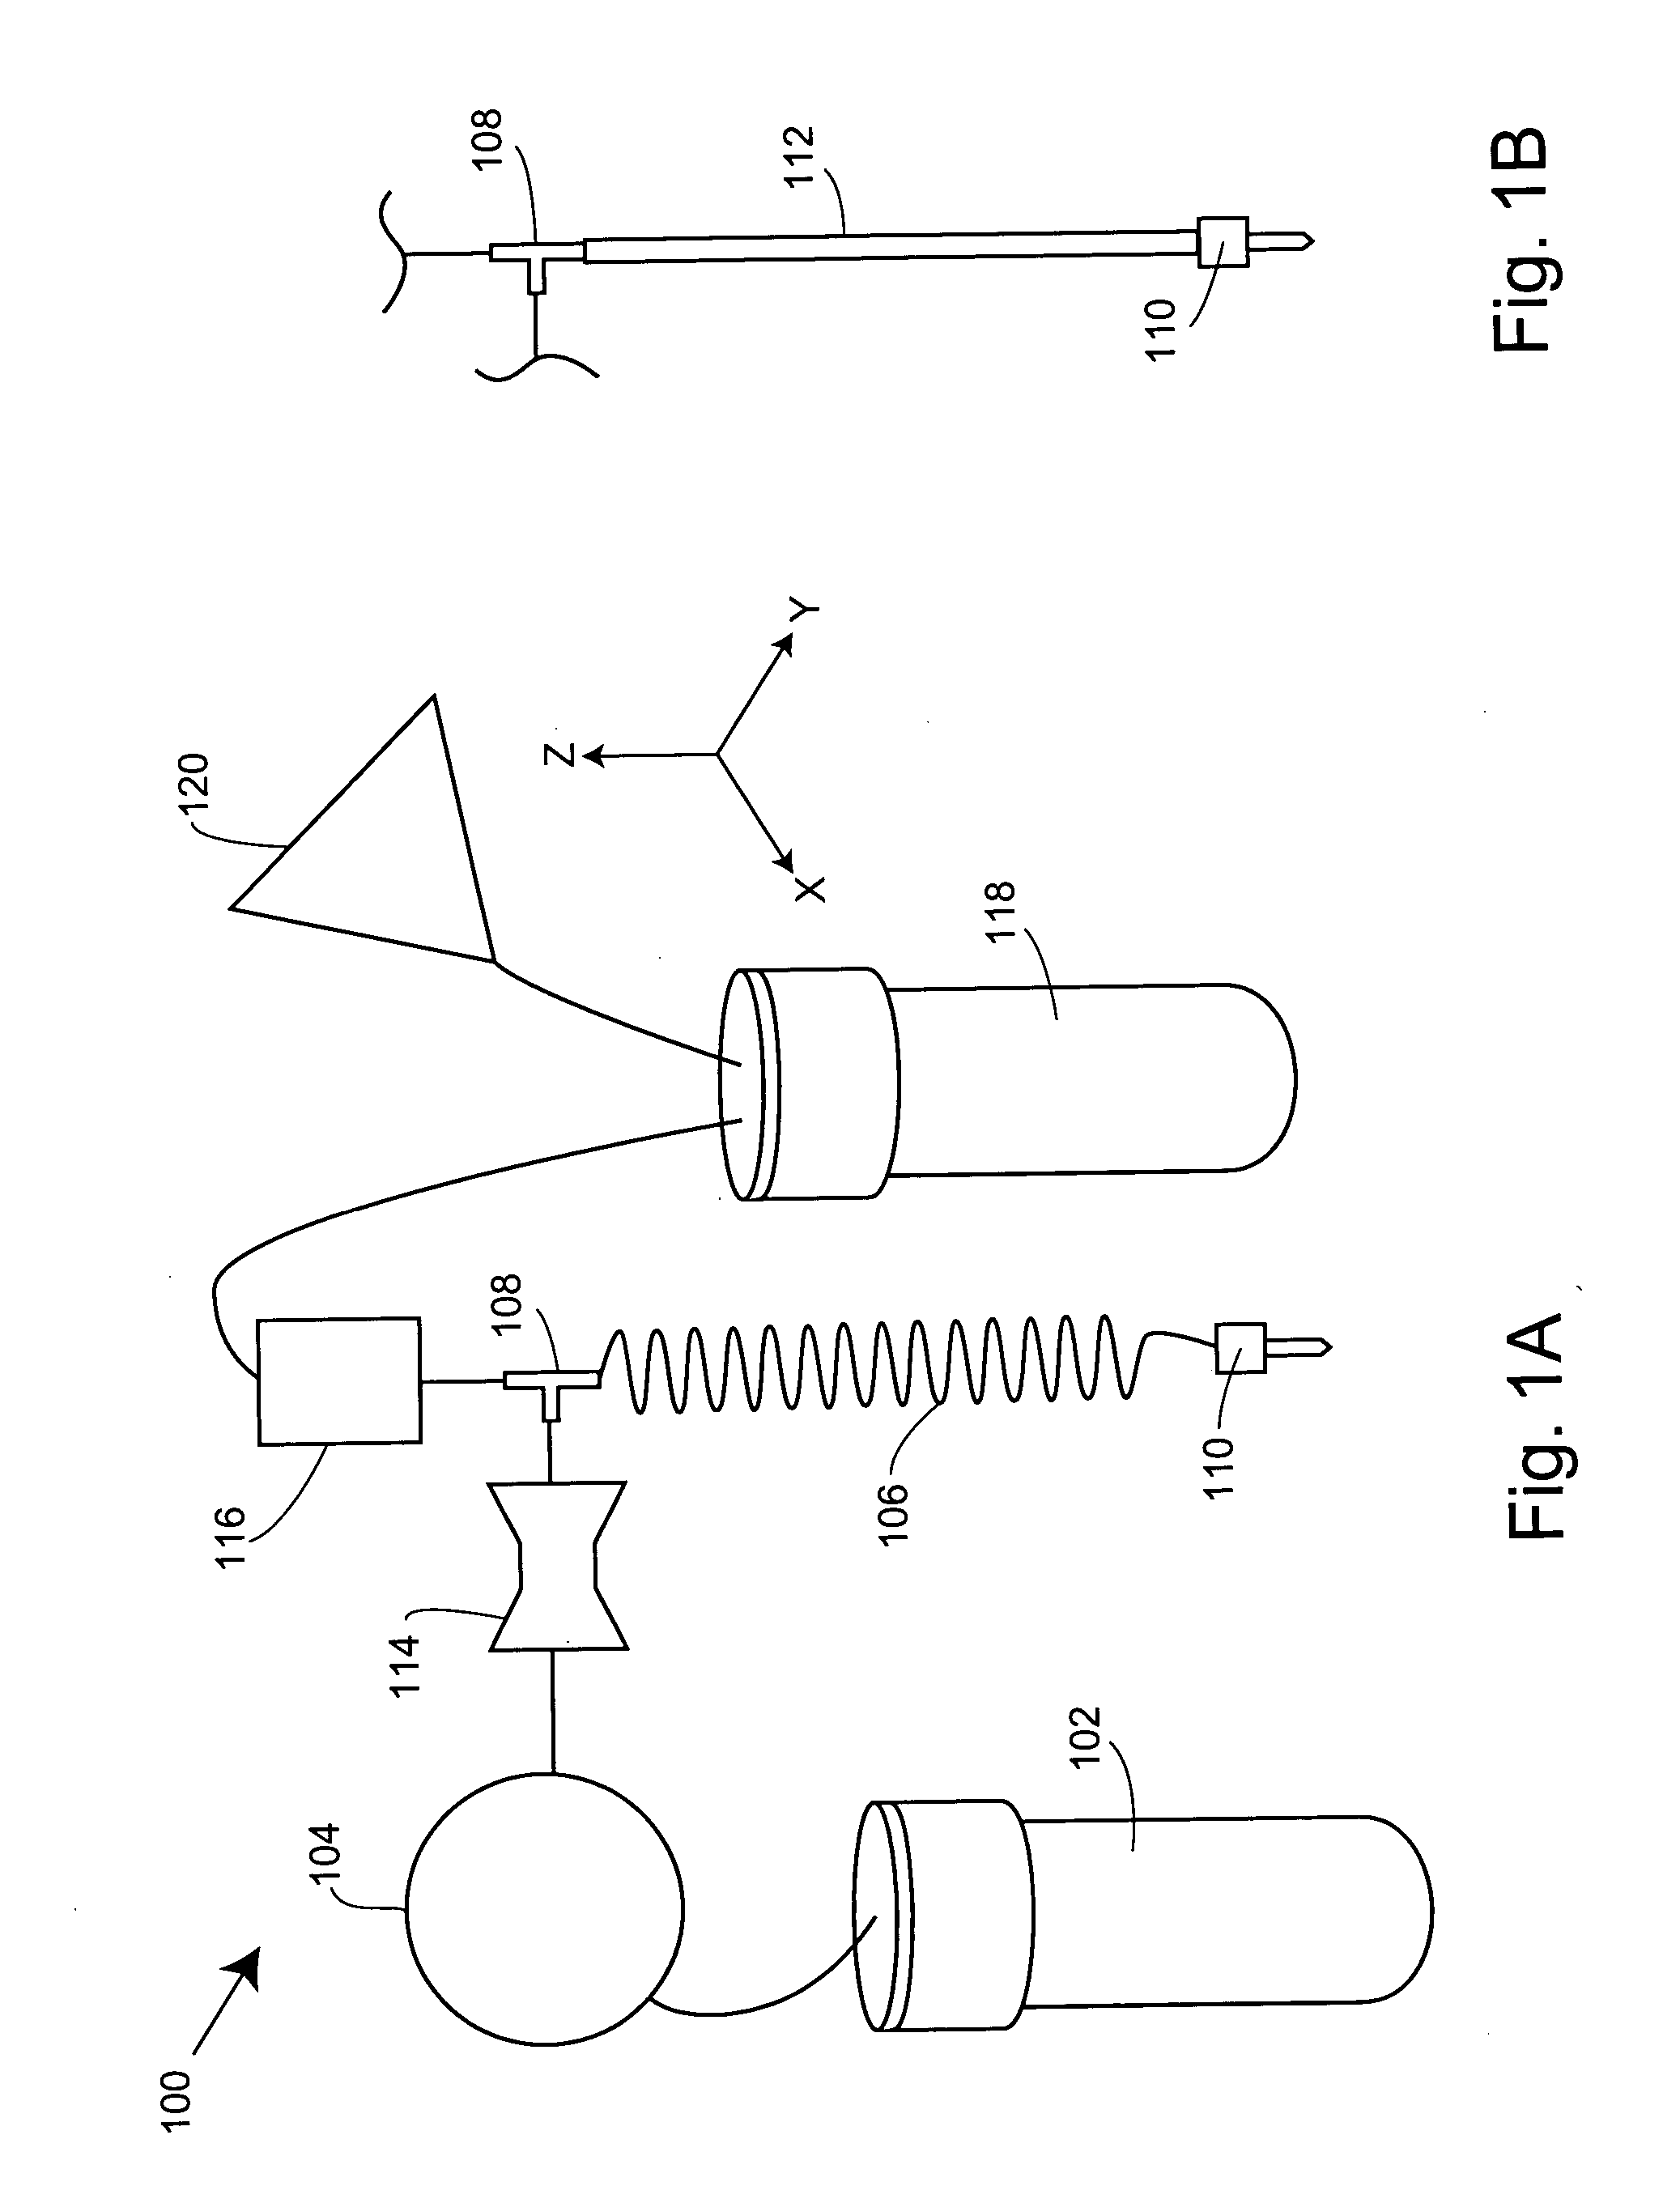 Dispensing systems, software, and related methods